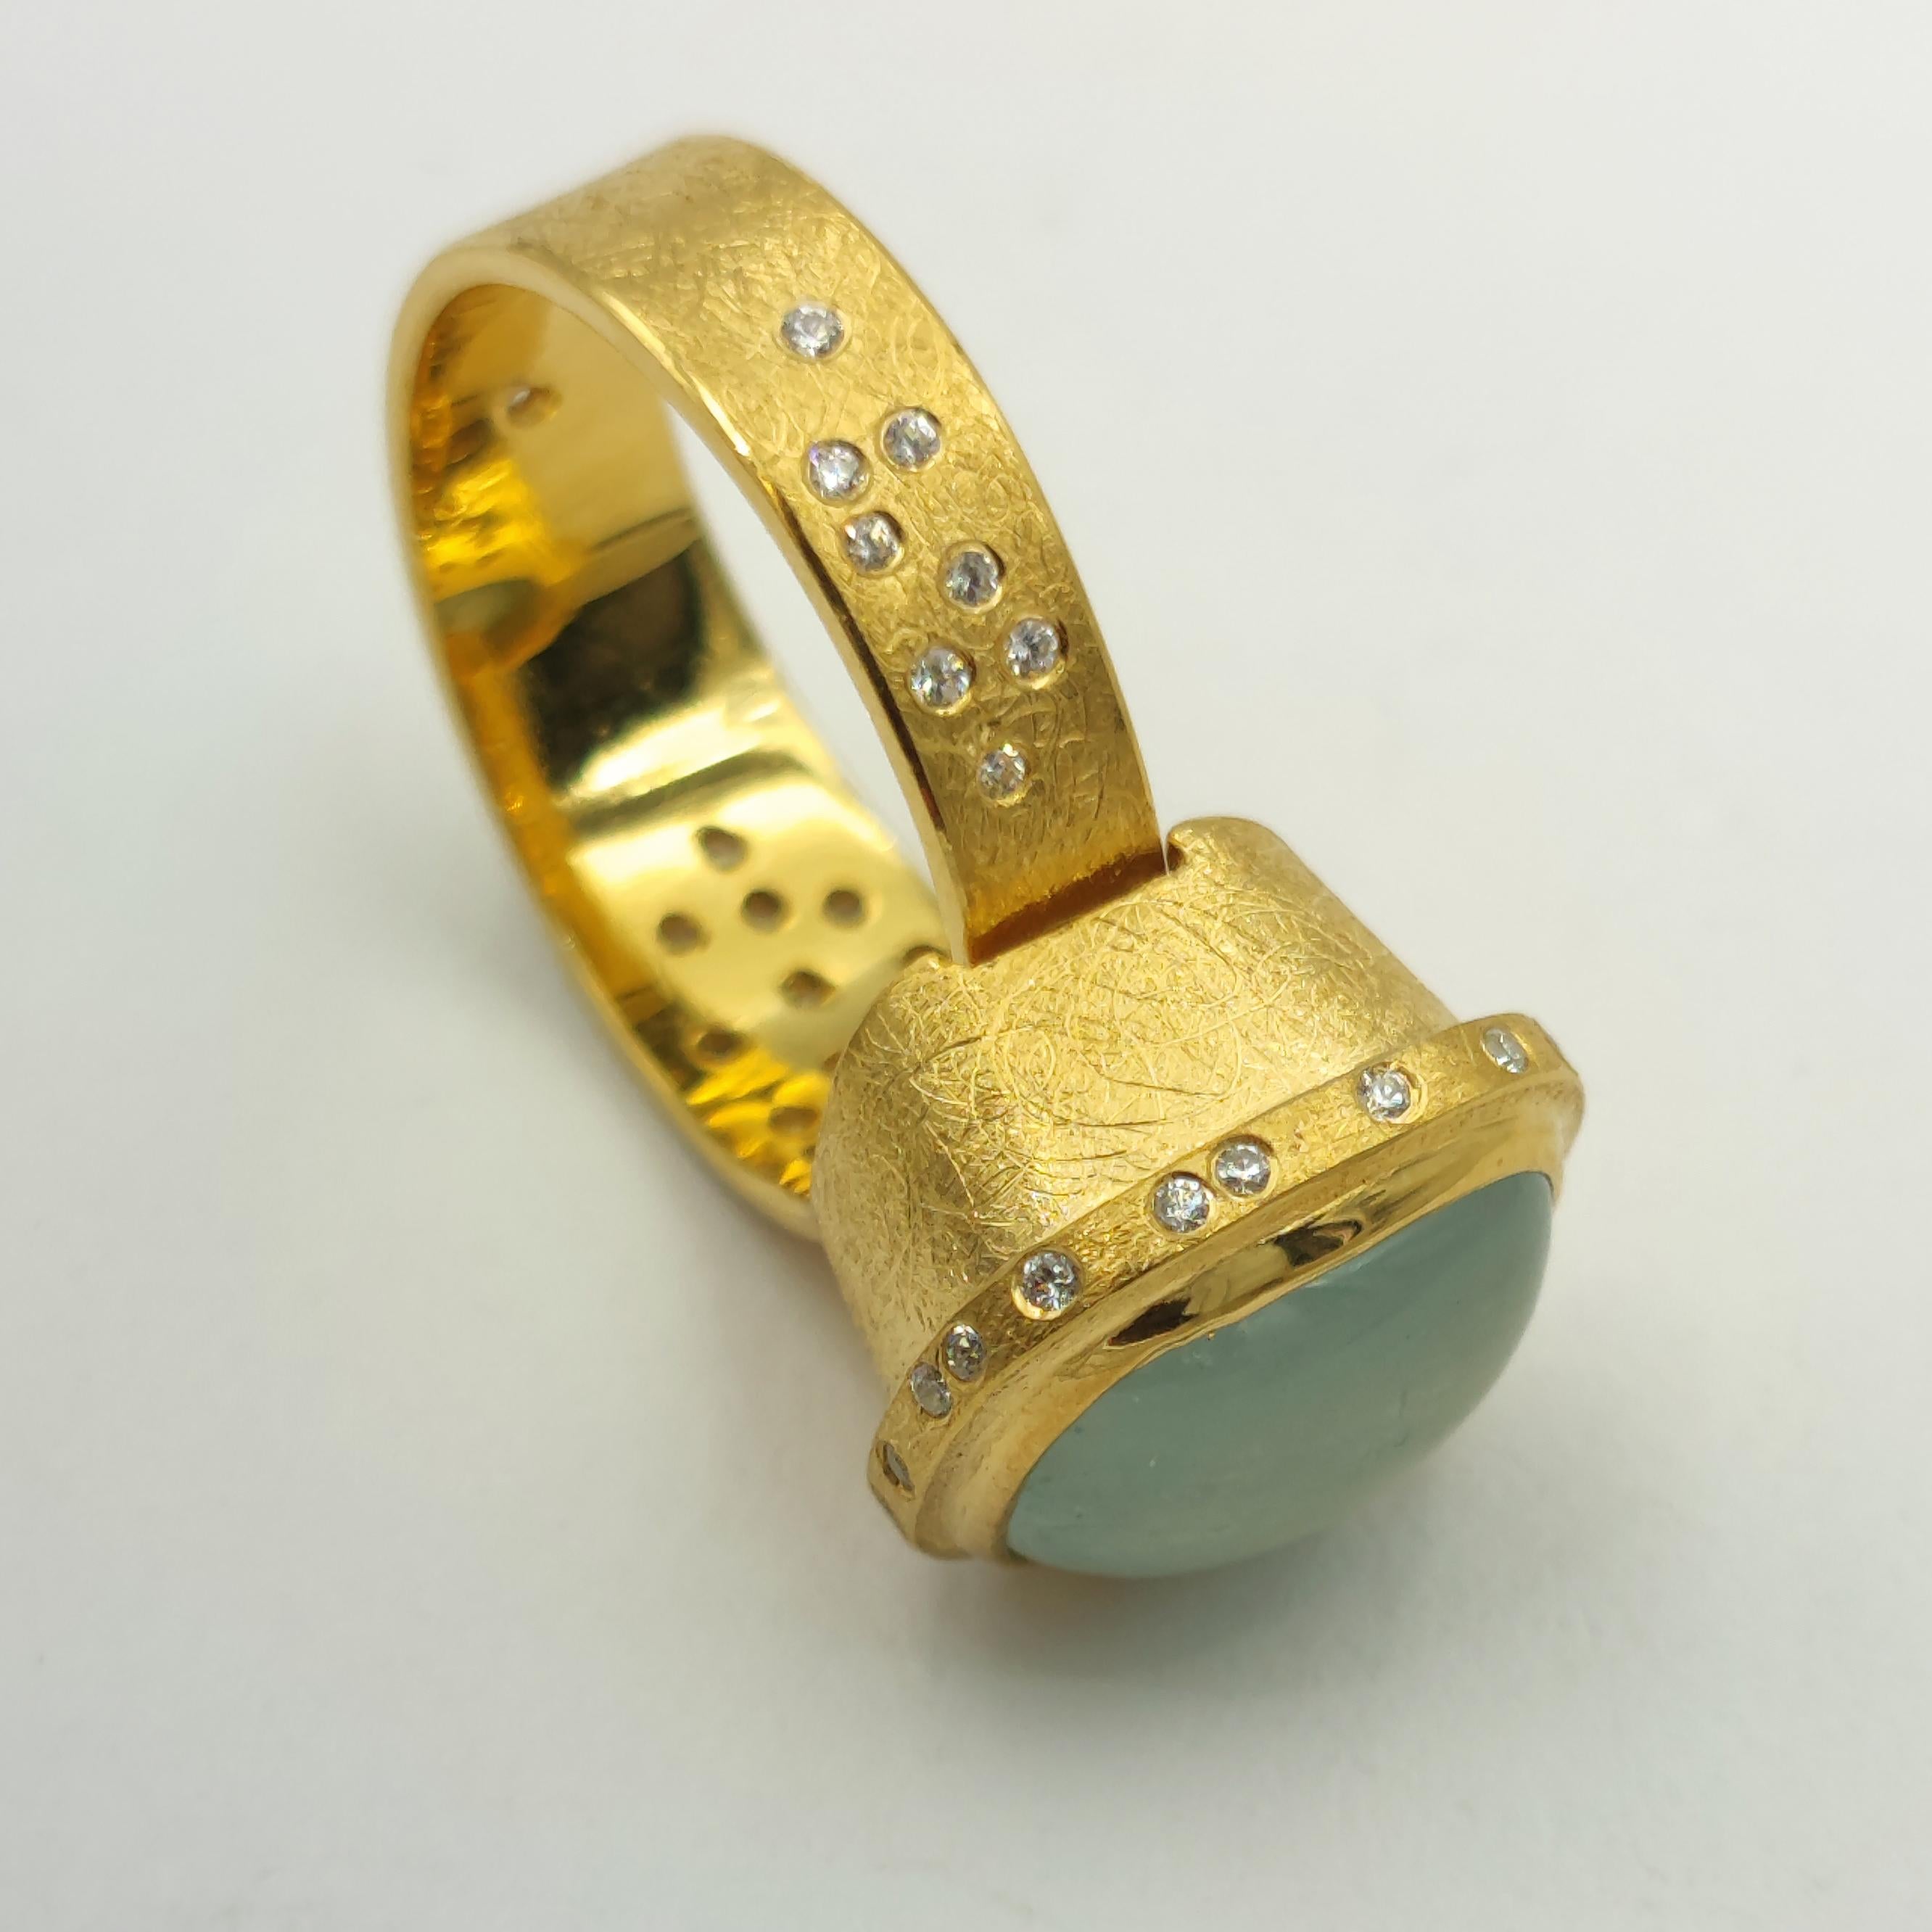 Aquamarine White Zircon Silver 24 K Gold Plate Contemporary  Design Modern Ring
Hand made unique adjustable ring with aquamarine and cubic zirconia.
Natural aquamarine in the form of a cabochon, inlaid with cubic zirconia (46 stones with a diameter